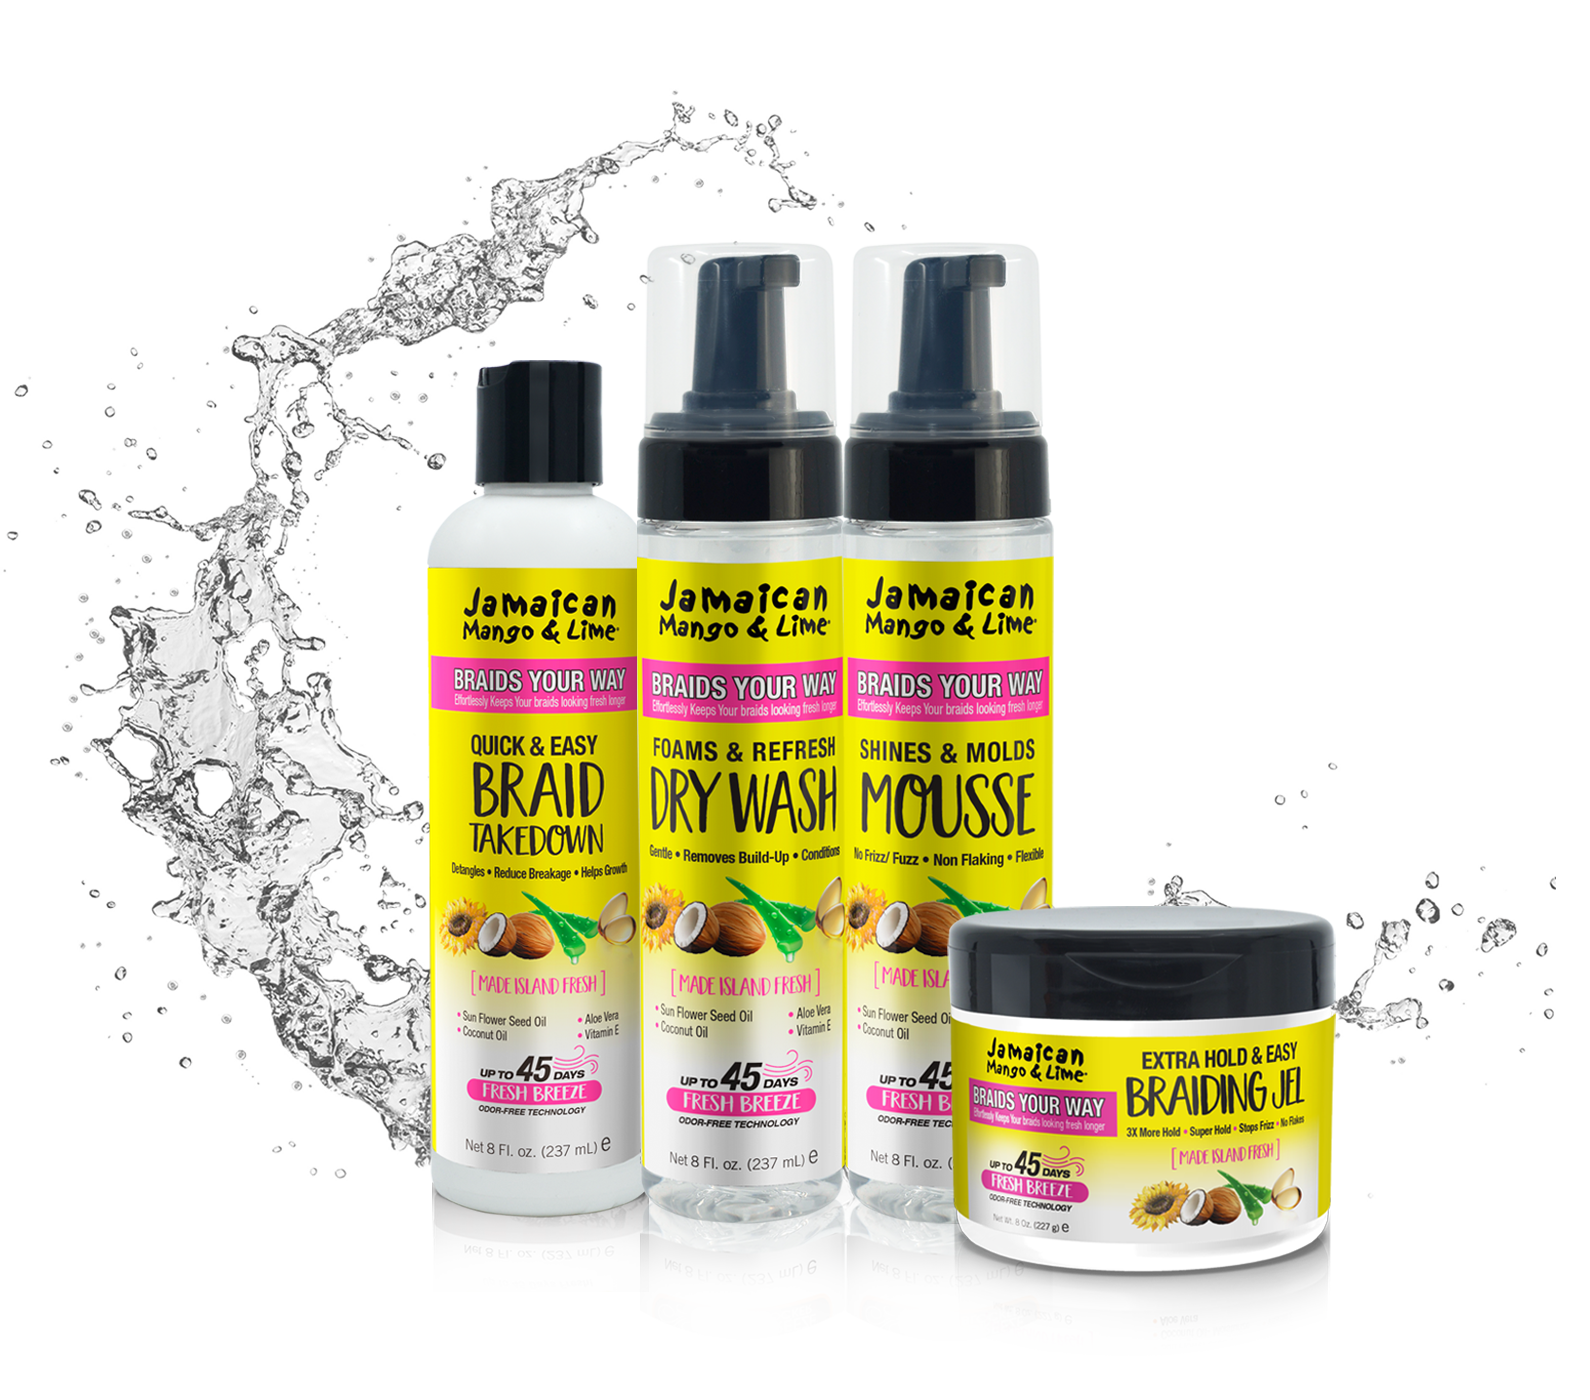 Haircare with the Jamaican Mango & Lime Product Line – The Savvy Ranger